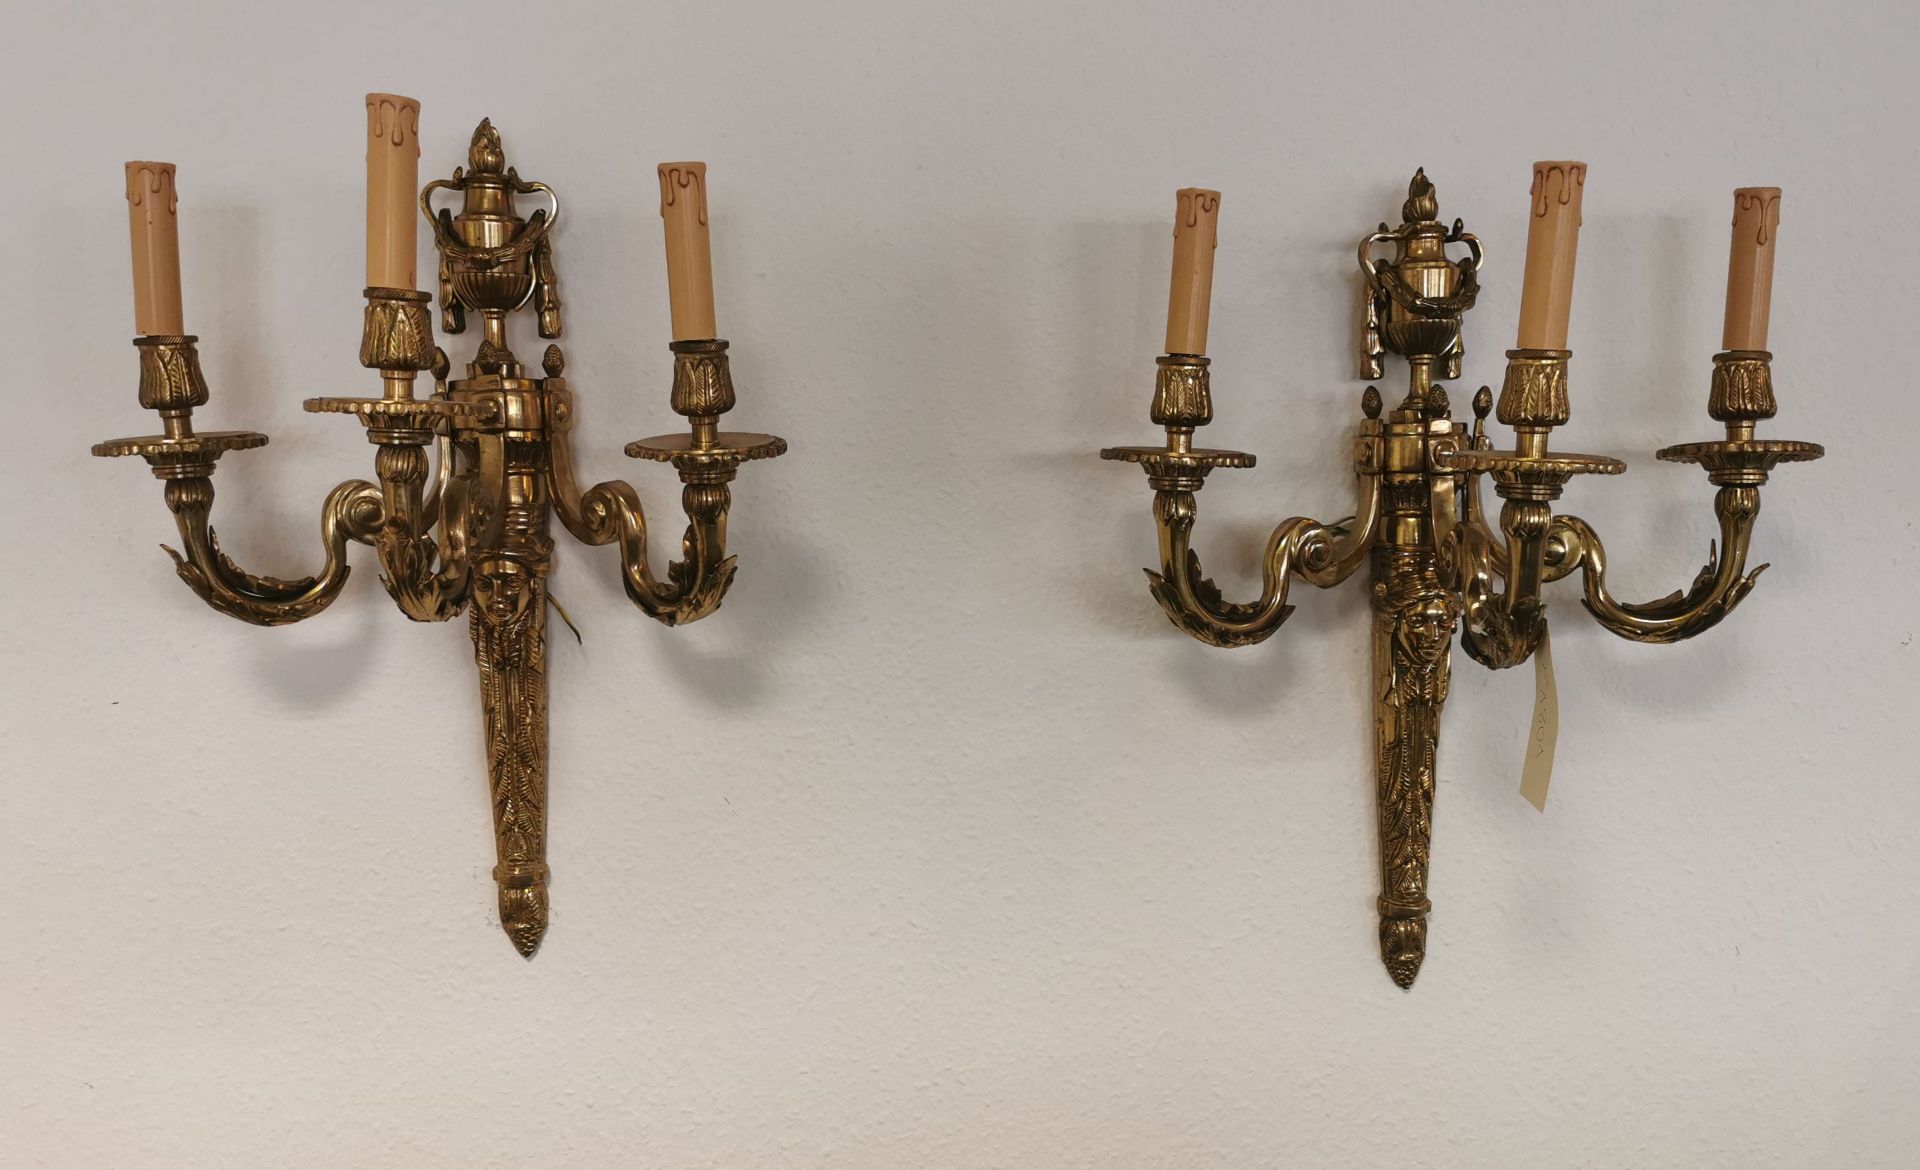 2 SPLENDID THREE-LIGHT SCONCES IN THE FORMAL LANGUAGE OF THE EMPIRE